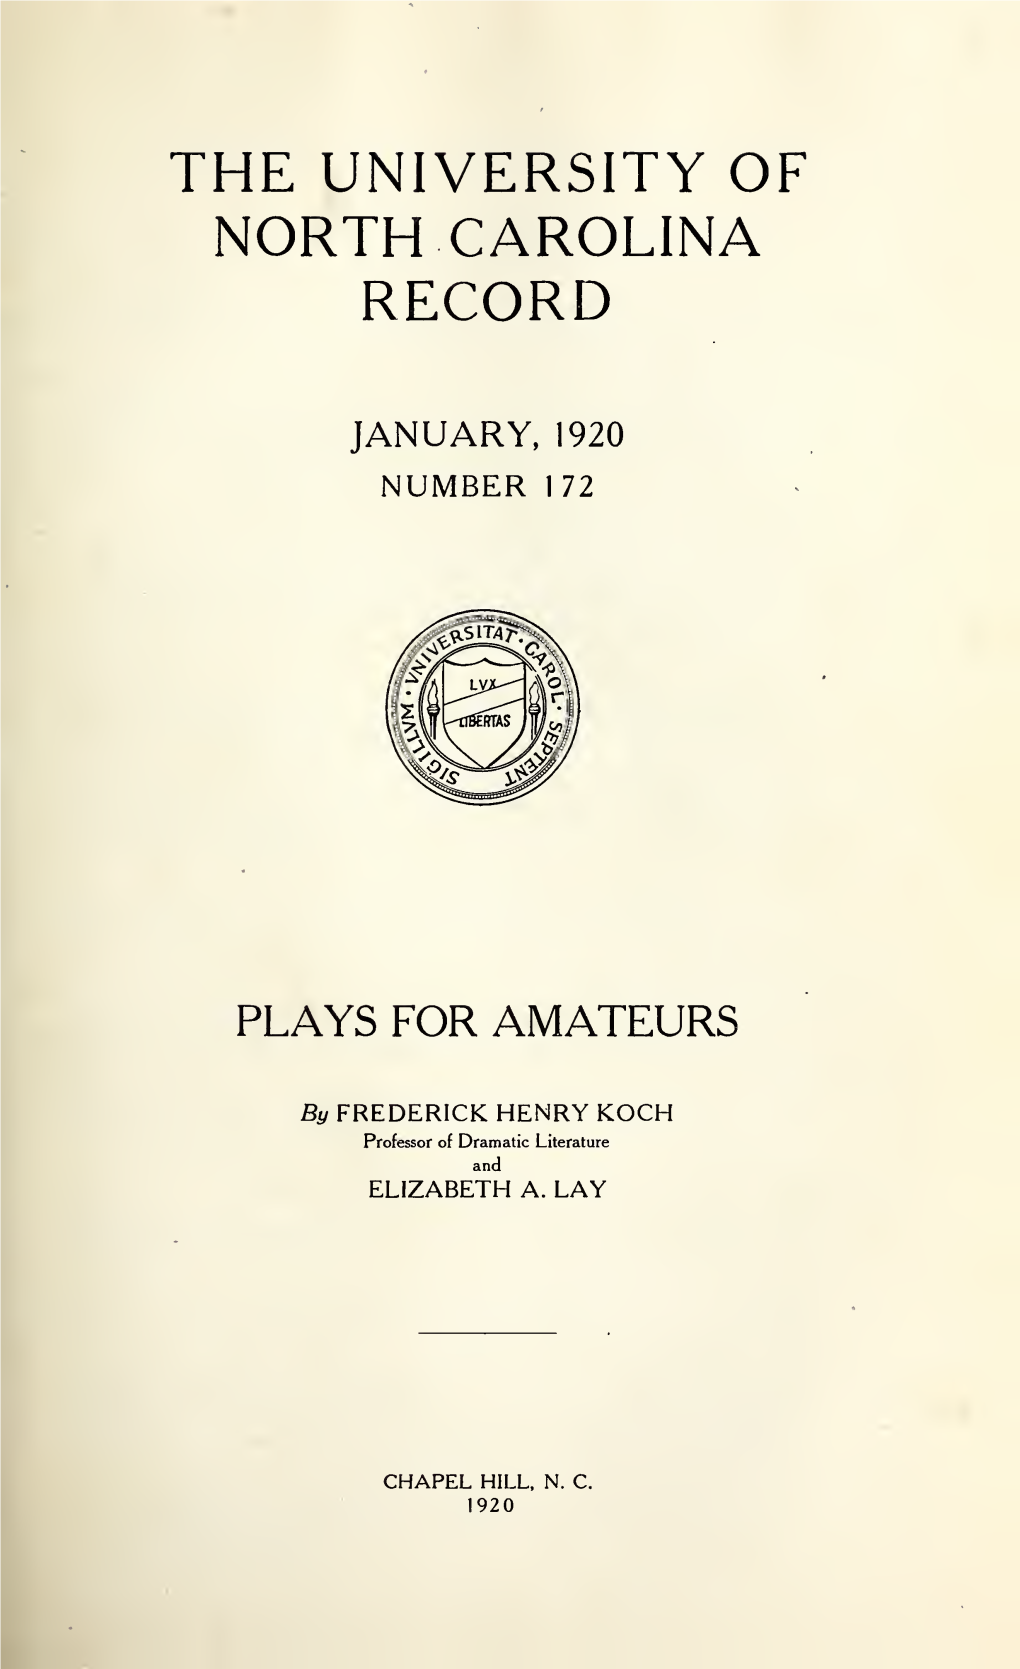 The University of North Carolina Record. Plays for Amateurs. [1920]